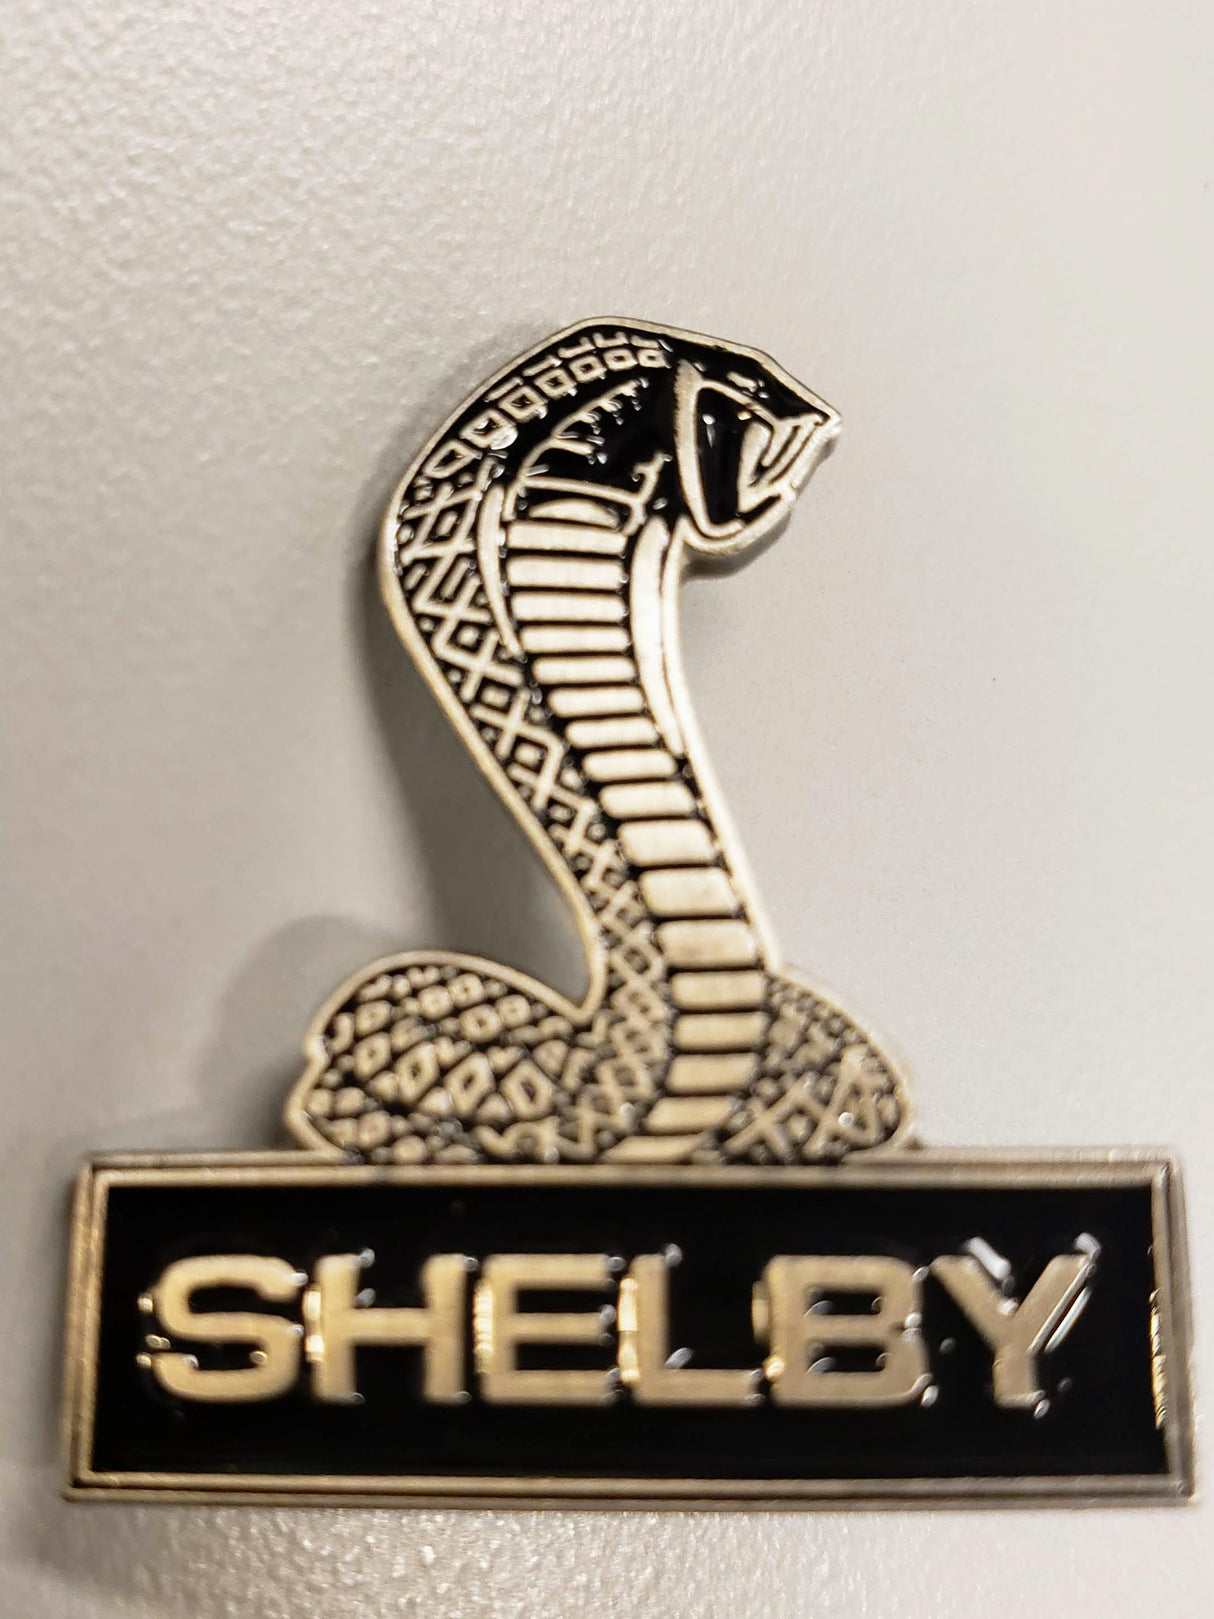 Shelby Lapel Pin with Cobra